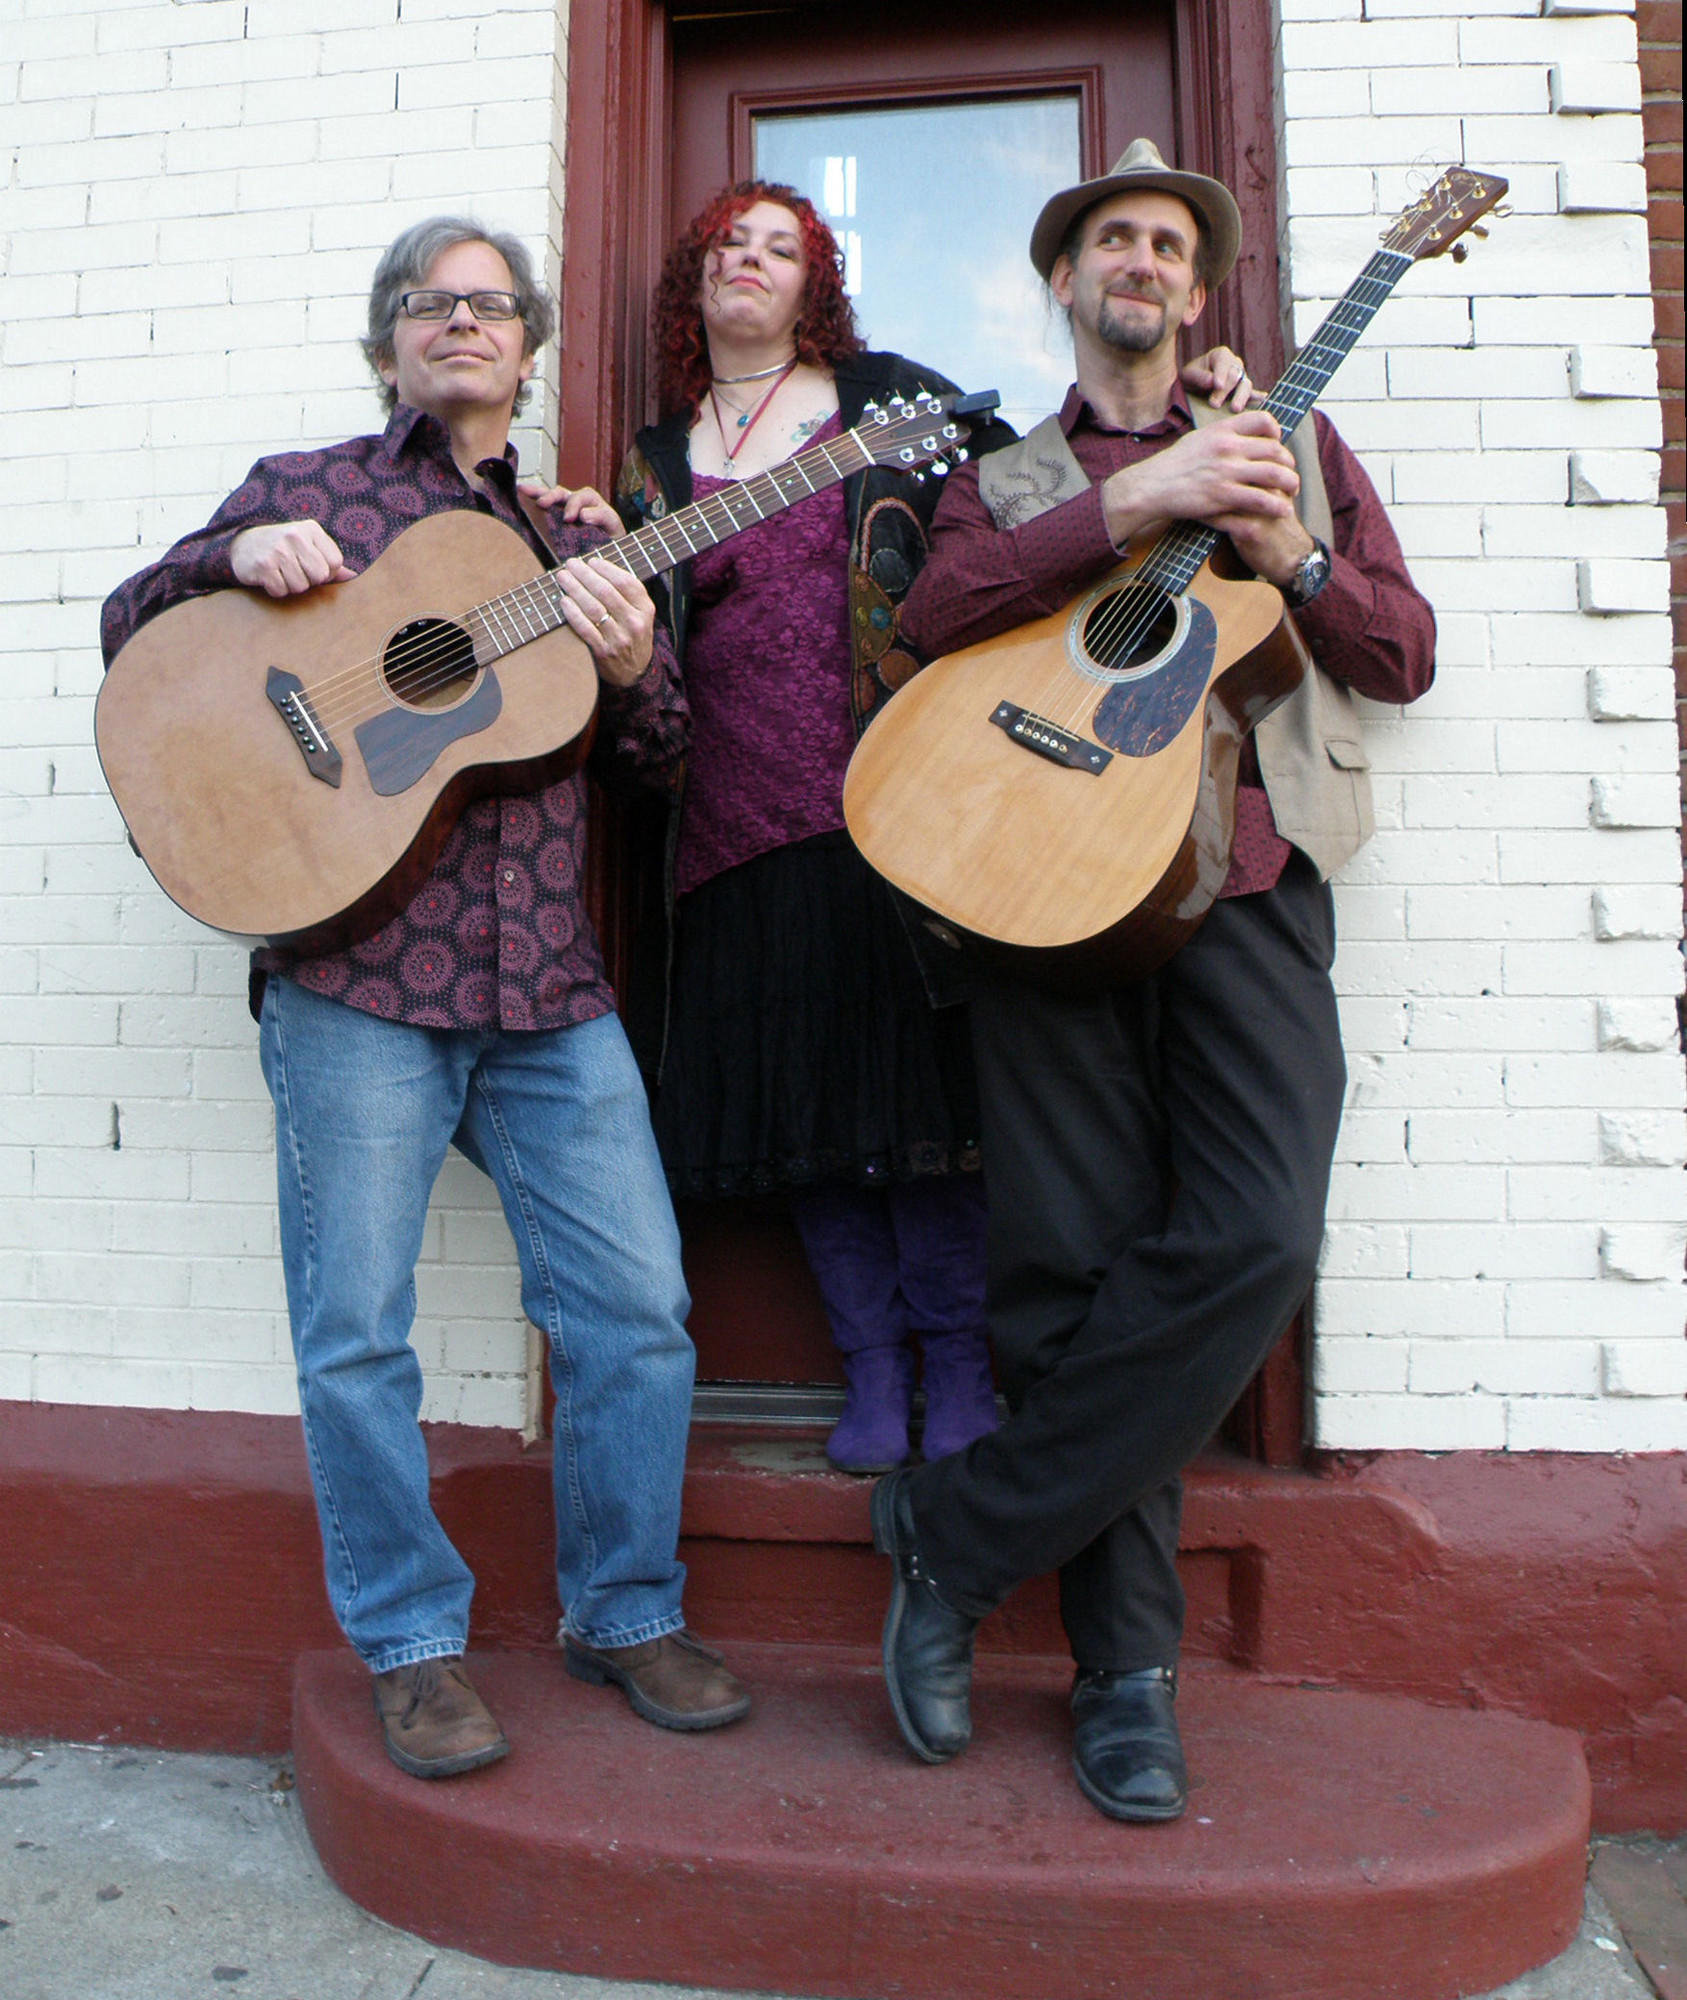 Stuart Markus, right, a Malverne resident, is leader of the folk group, Gathering Time, which will headline at the Crossroads Farm Folk Festival.